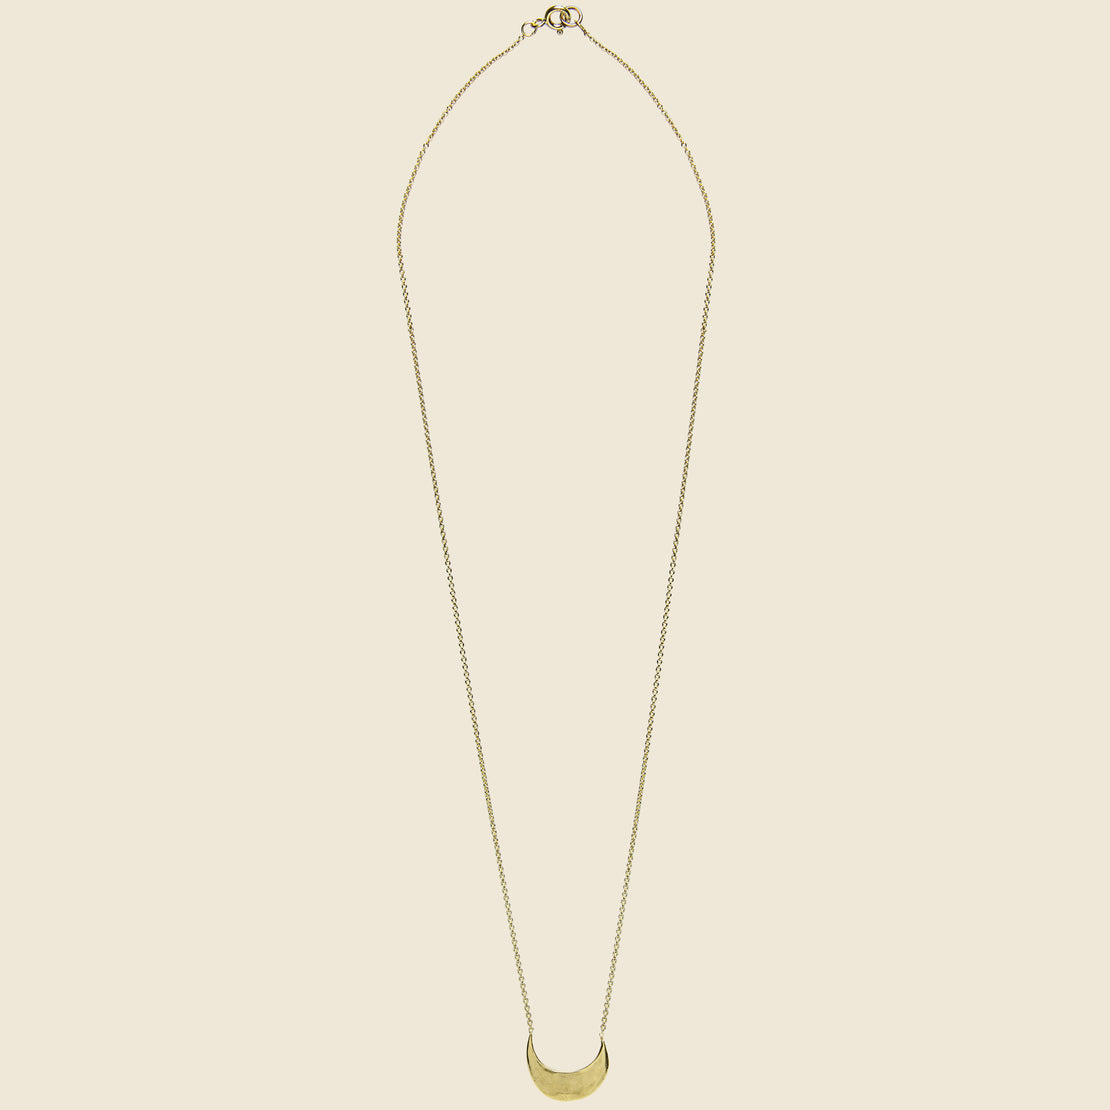 Muse Crescent Necklace - Bronze - Amanda Hunt - STAG Provisions - W - Accessories - Necklace